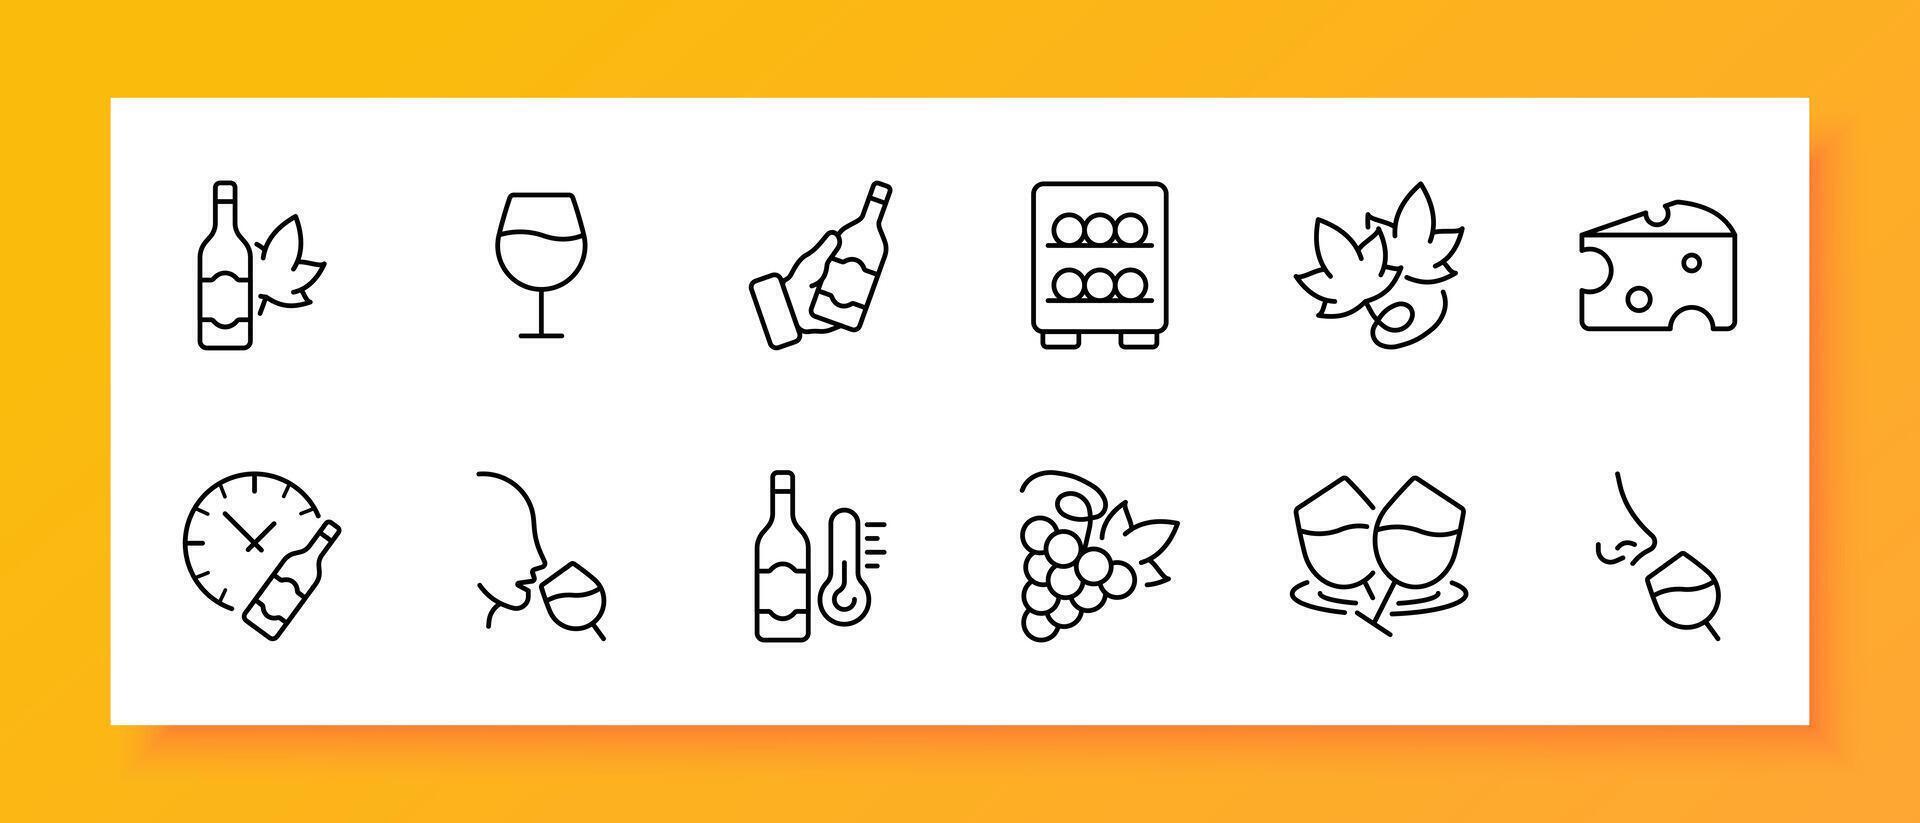 Winemaking icon set. Bottle, grapes, temperature, aging, cheese, snack. Black icon on a white background. Vector line icon for business and advertising